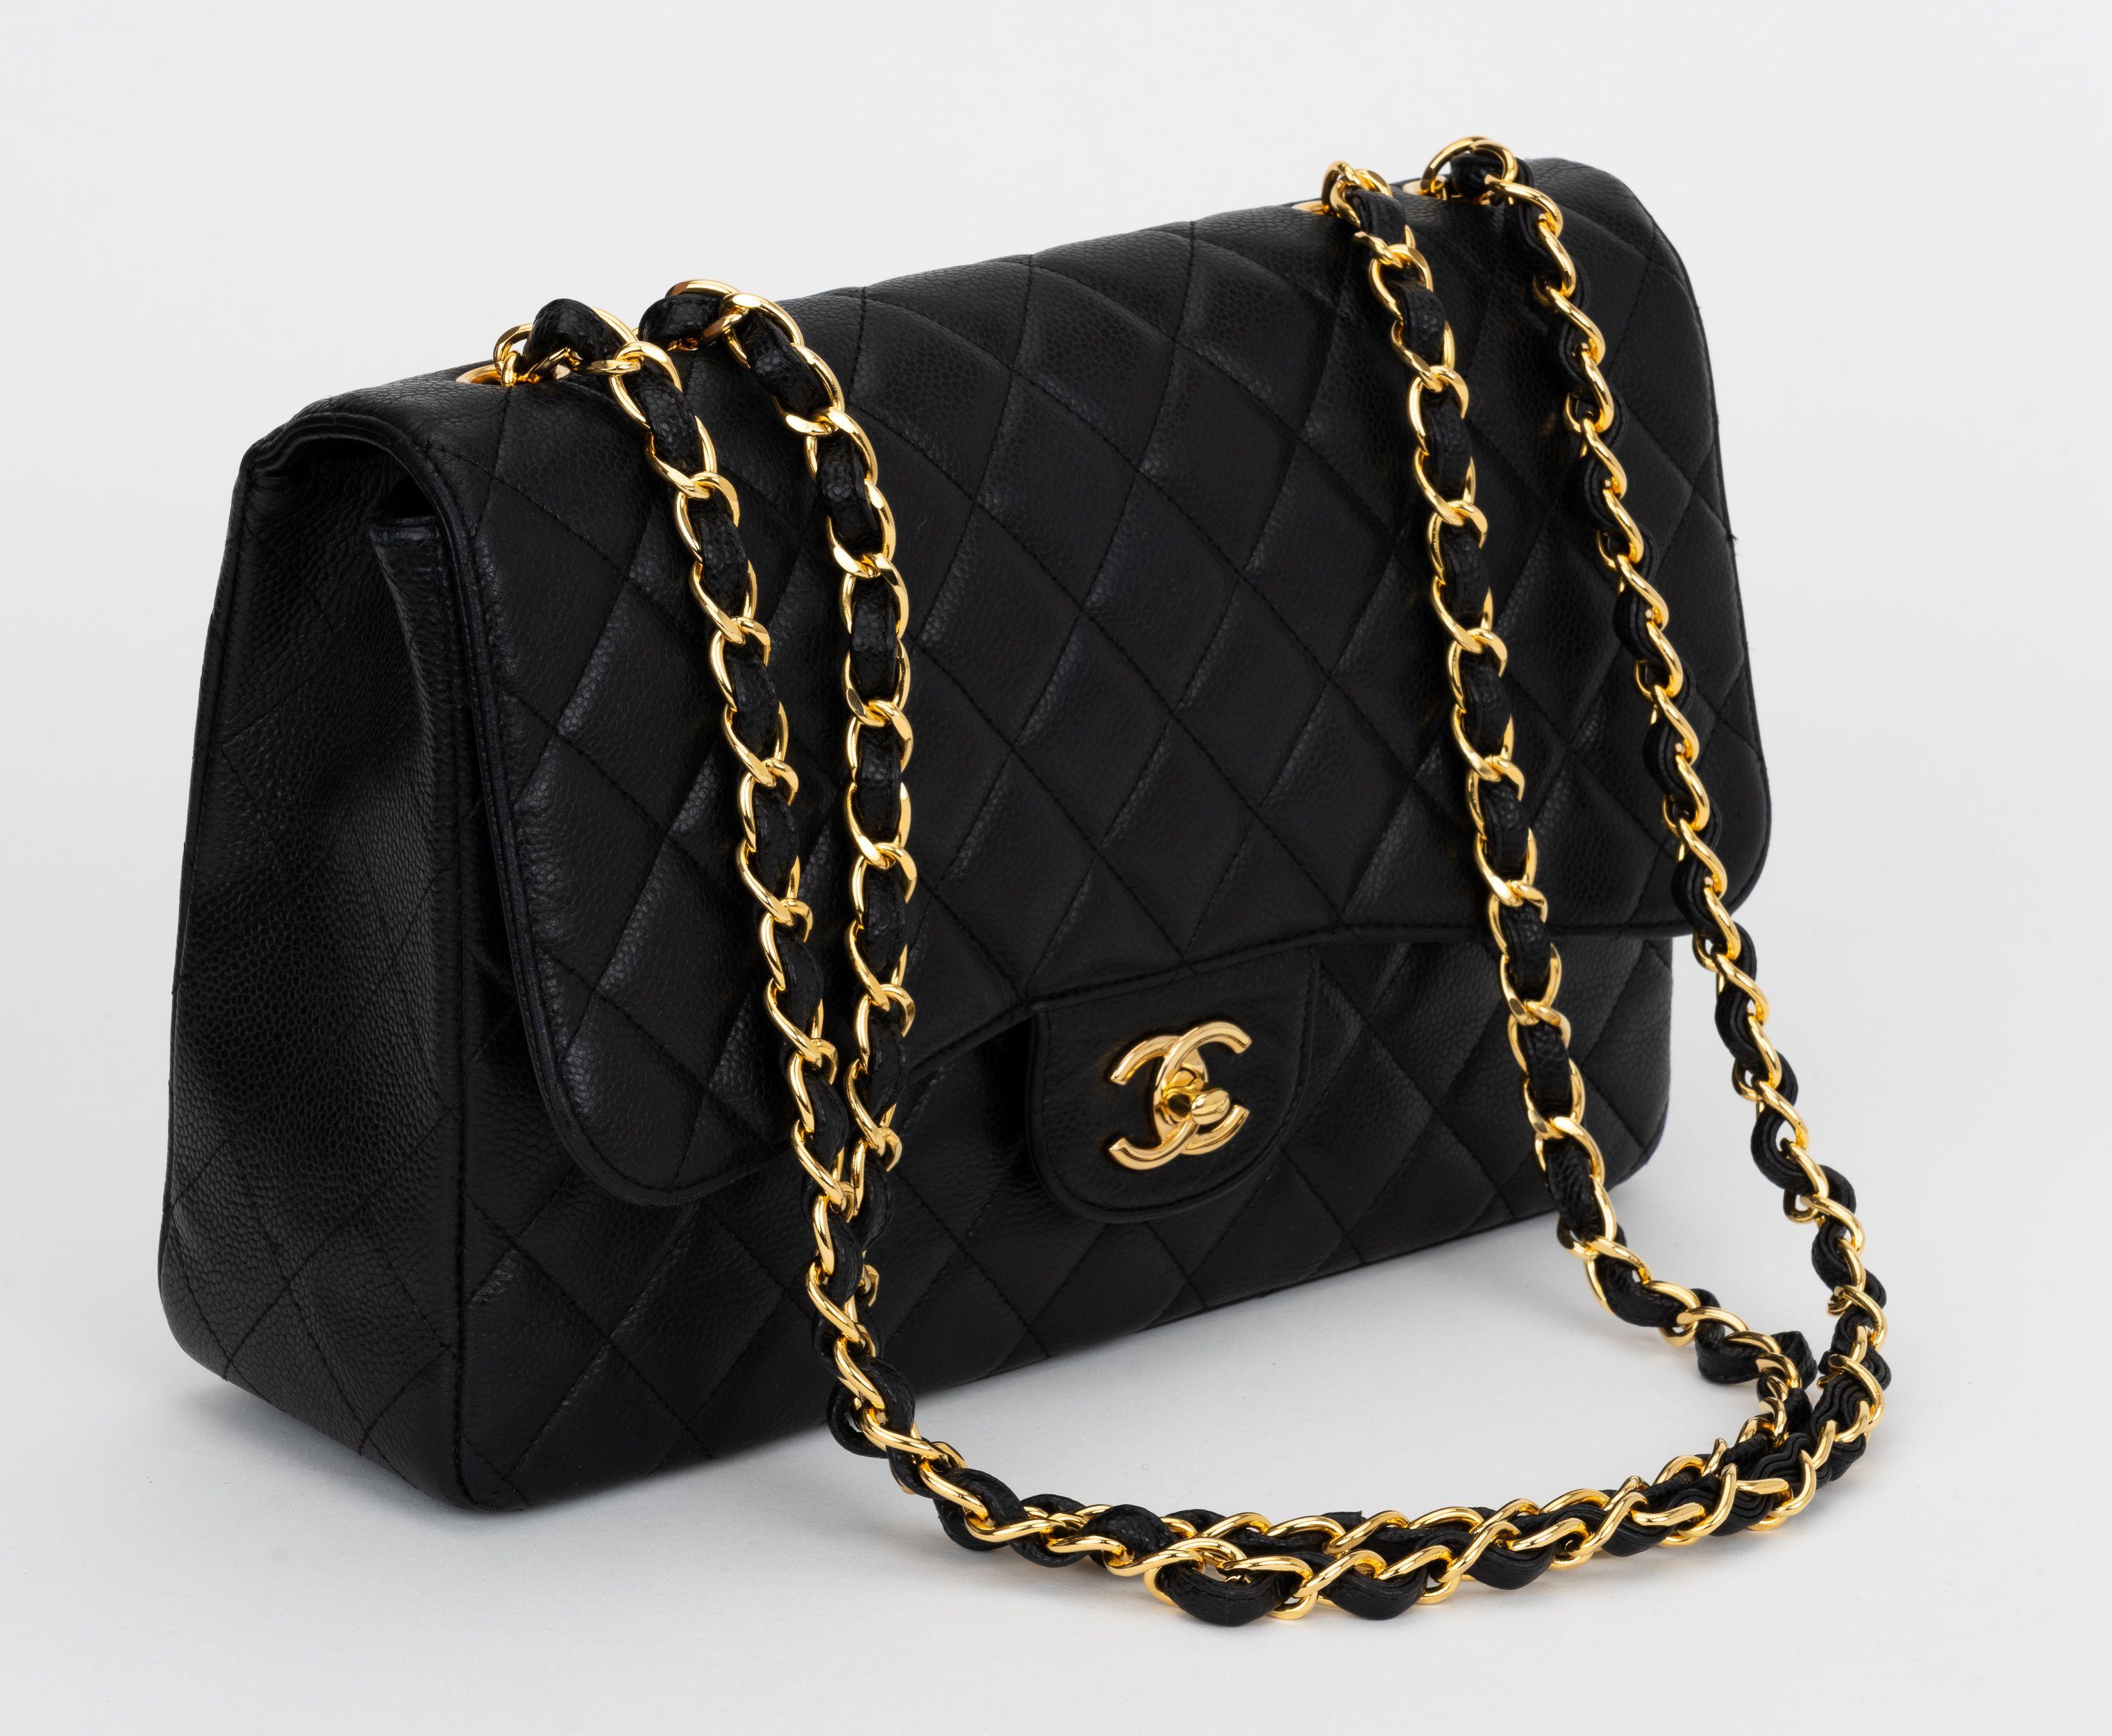 Chanel black caviar leather quilted jumbo single-flap bag.  Gold tone hardware. Shoulder drop, 14